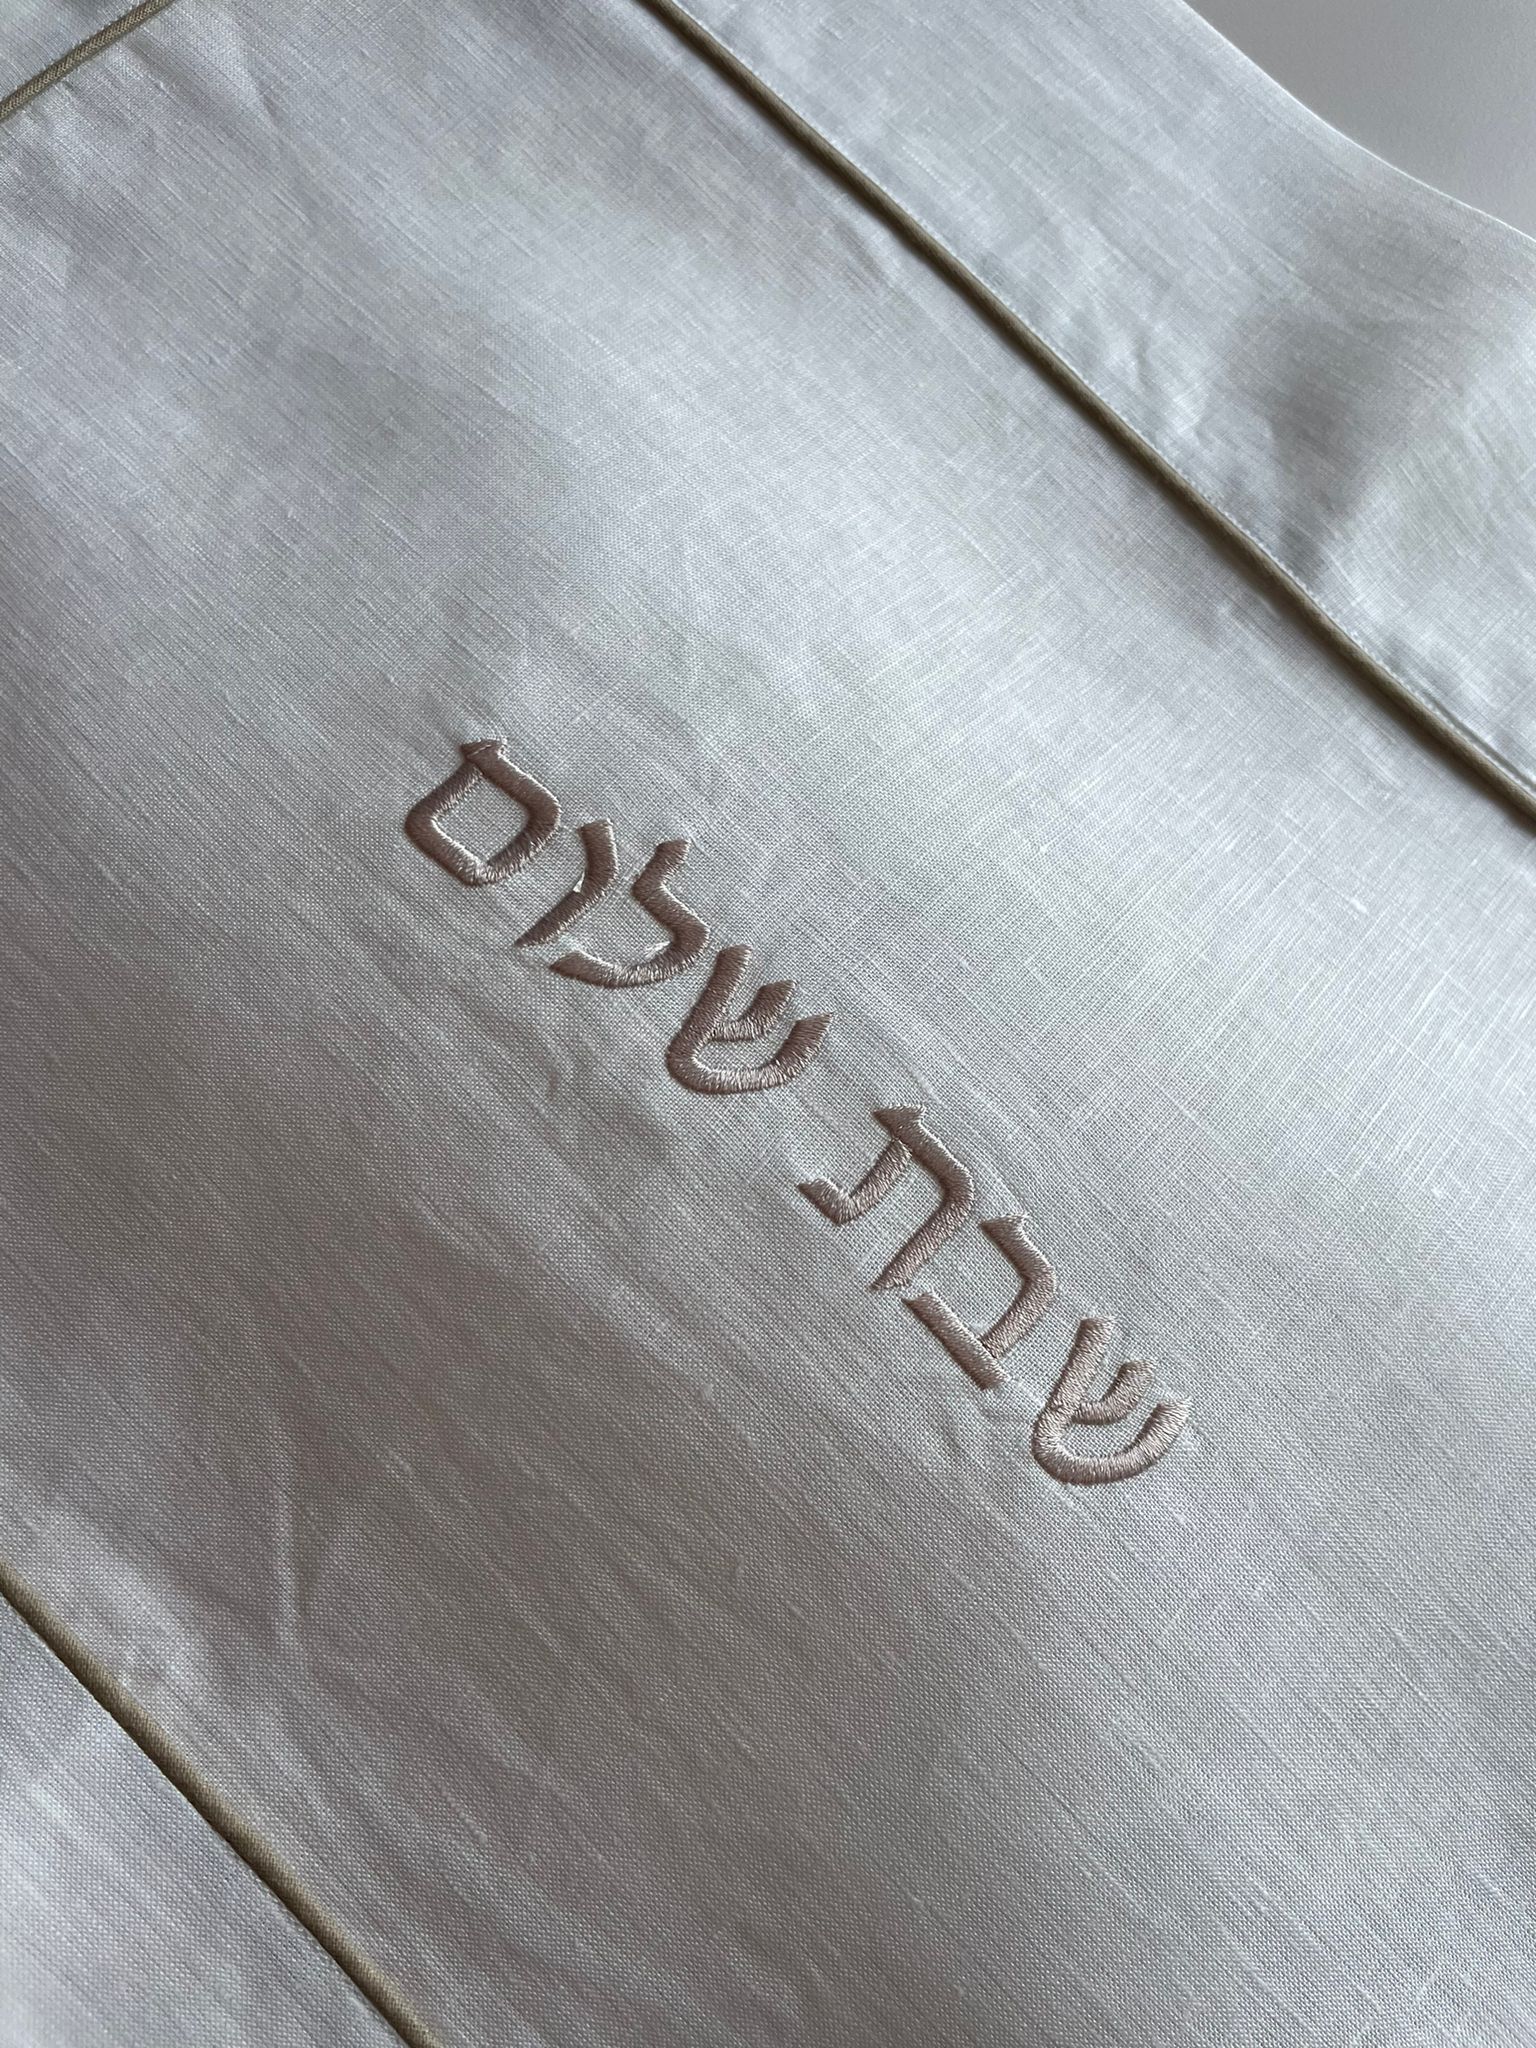 Beige Challah Cover Shabat Shalom text